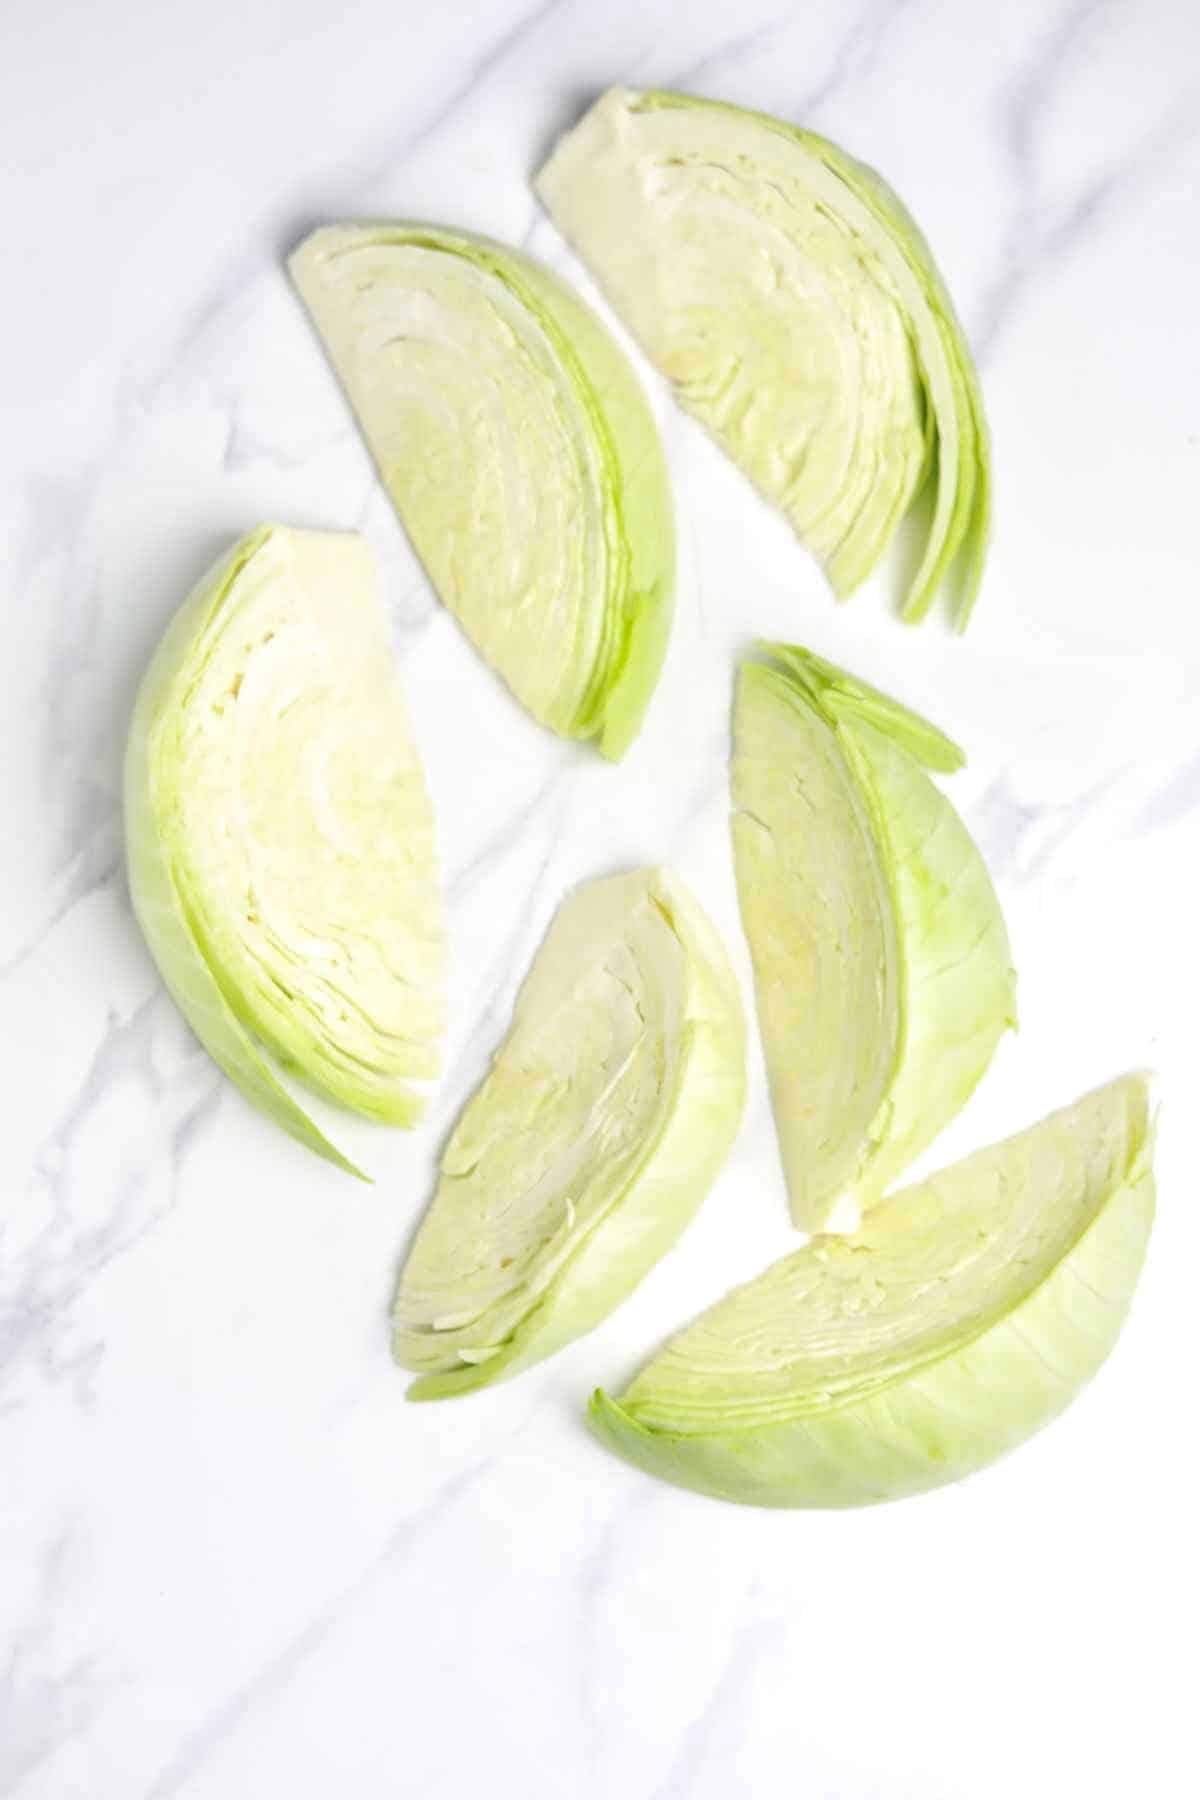 cabbage cut into wedges.